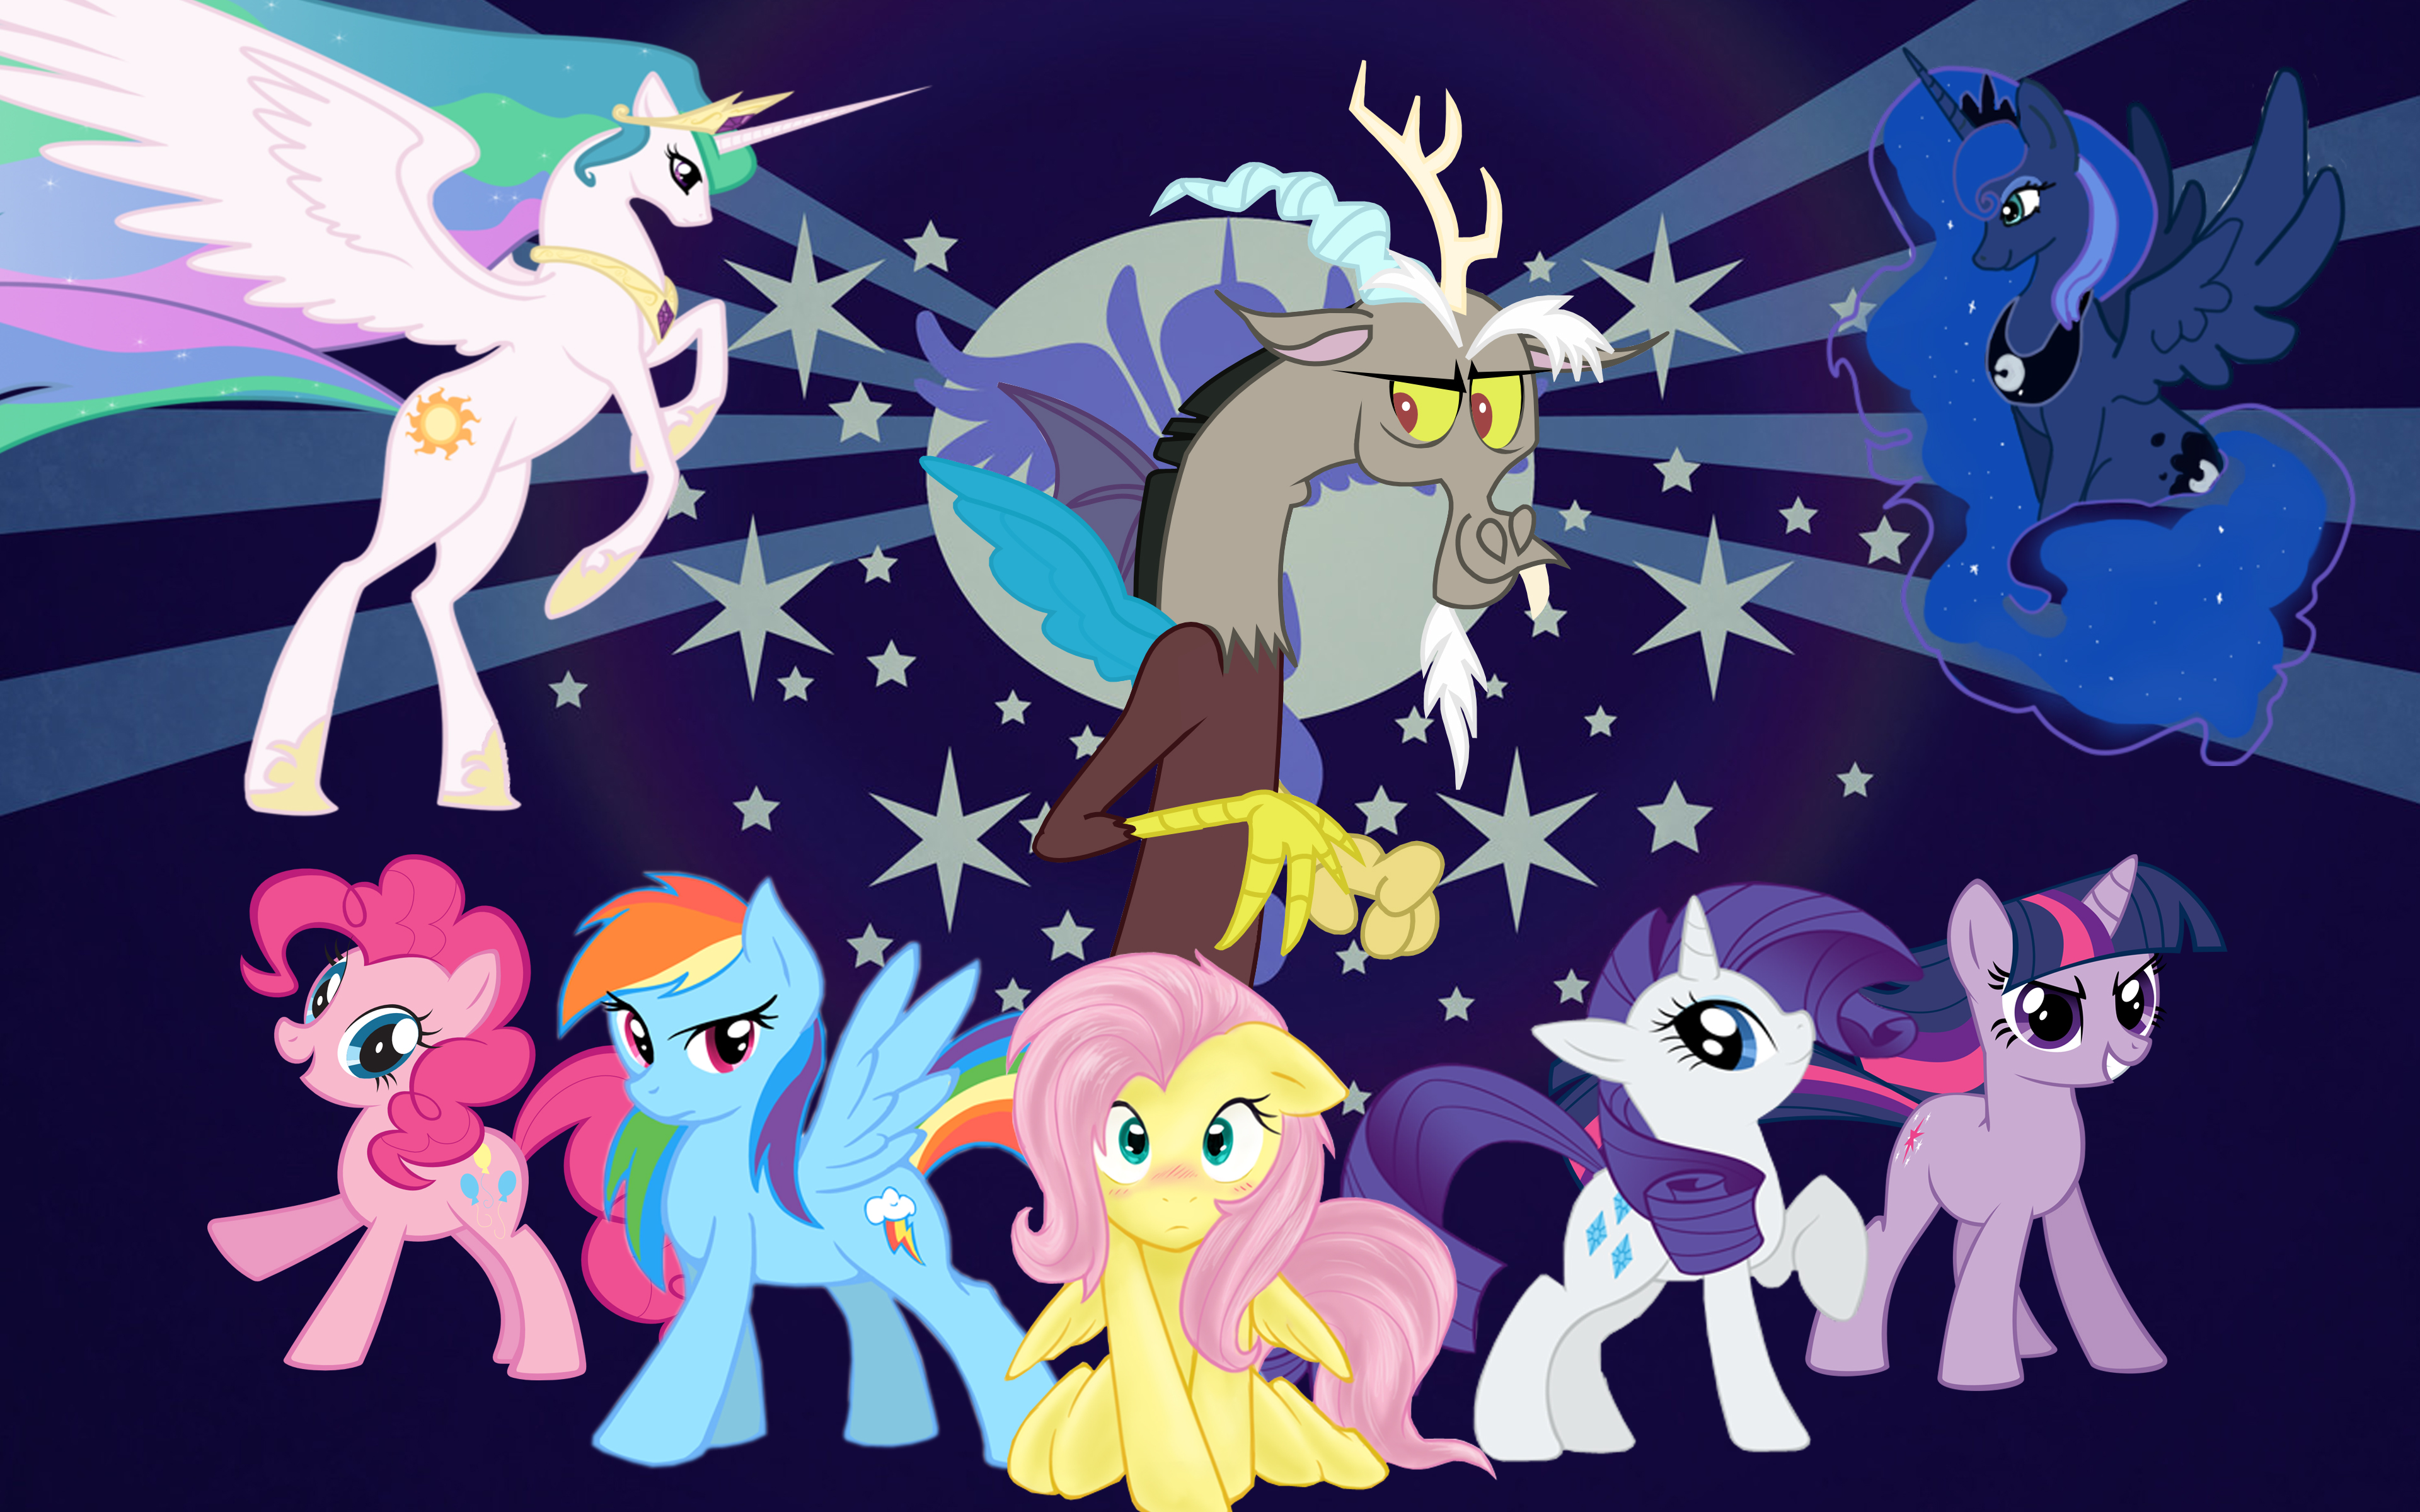 MLP Wallpaper by Ambris, Cleventine, ExtrahoVinco, OceanBreezeBrony, Silverymimiga and The-Smiling-Pony